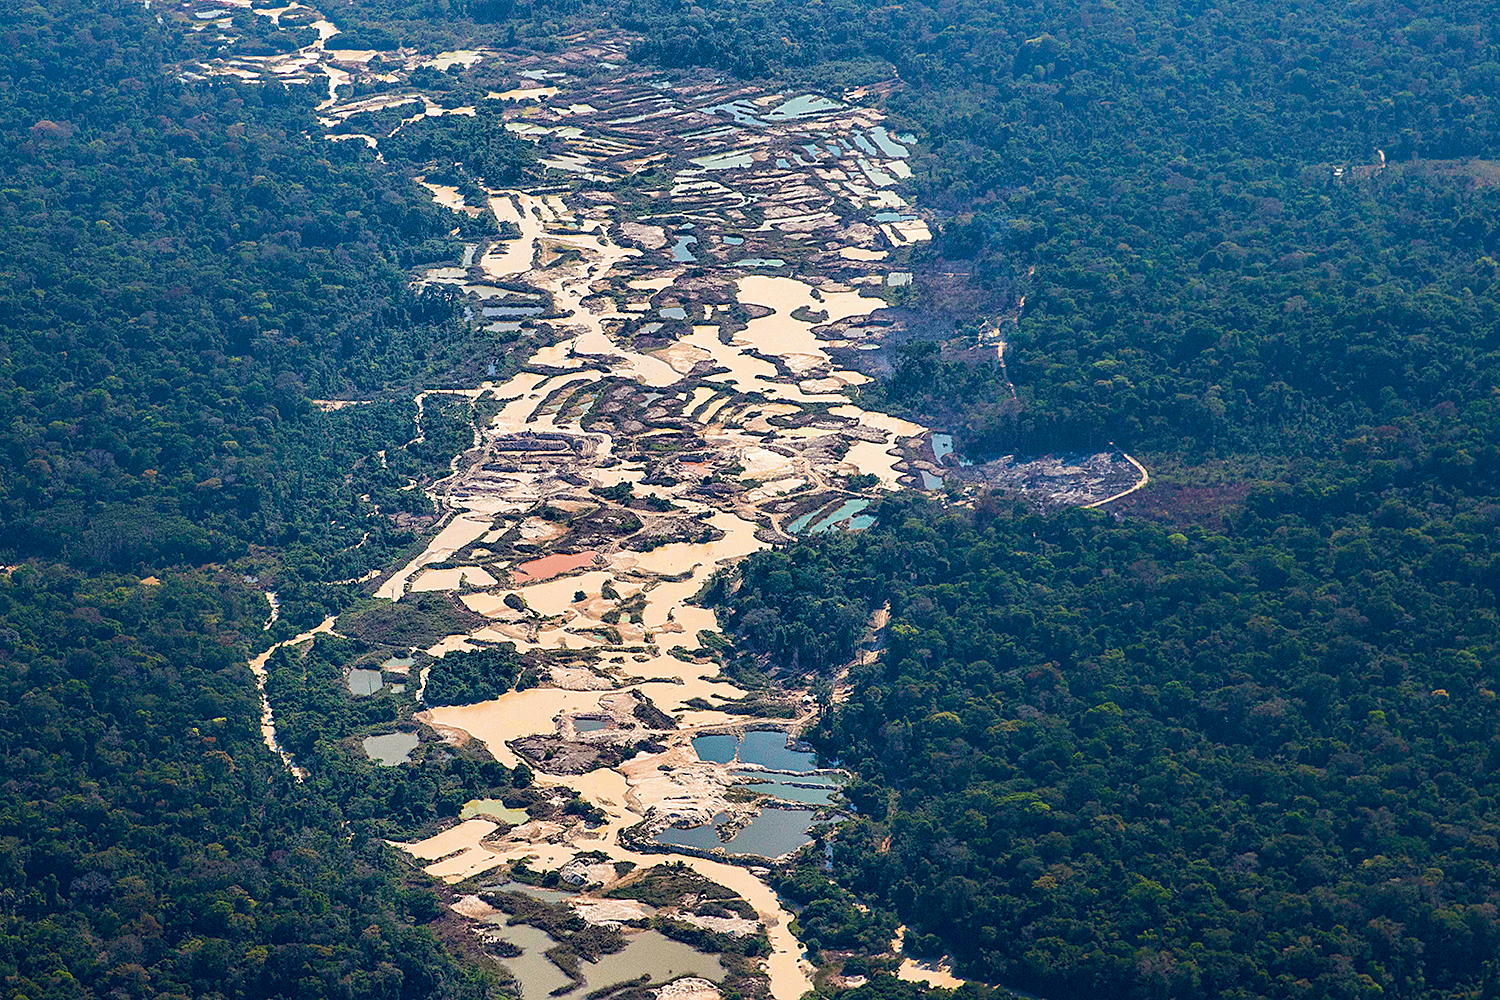 Concentration of numerous mining sites in Novo Progresso, Pará